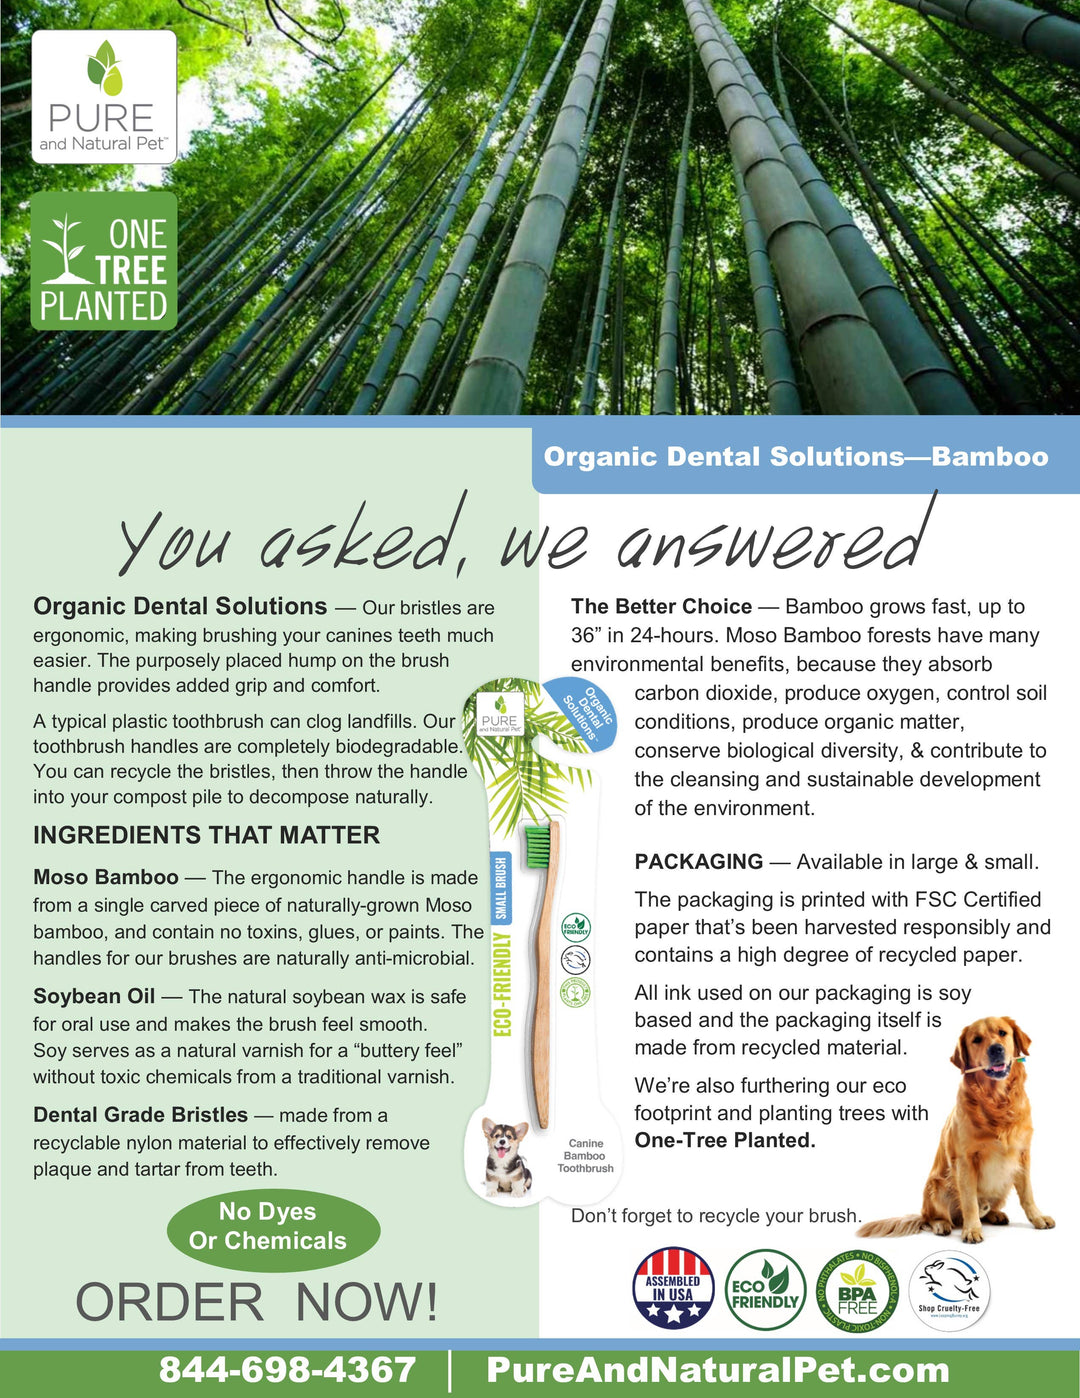 Organic Dental Bamboo Toothbrush for Dogs - Small